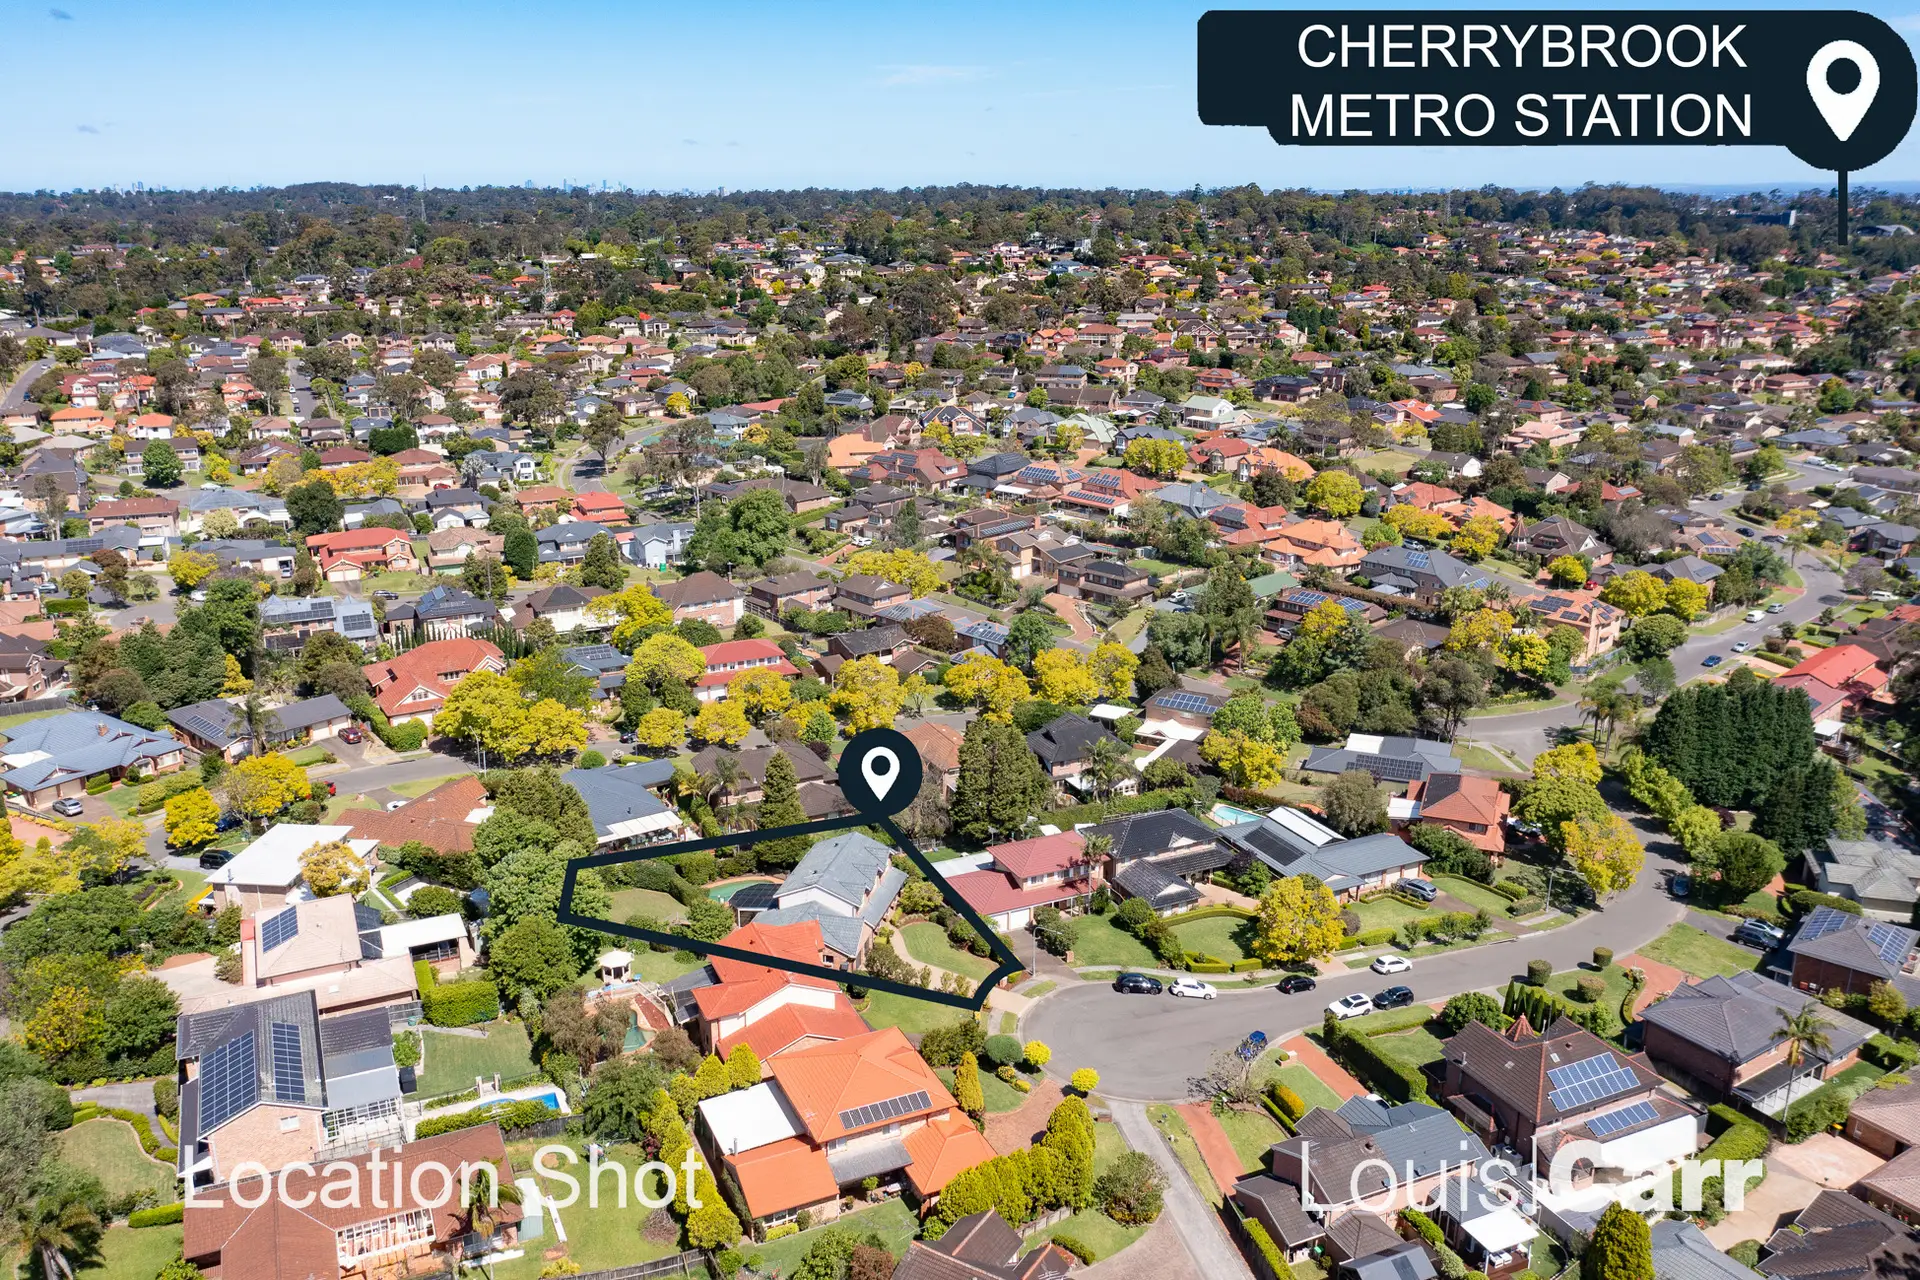 Photo #17: 12 Chiswick Place, Cherrybrook - Sold by Louis Carr Real Estate